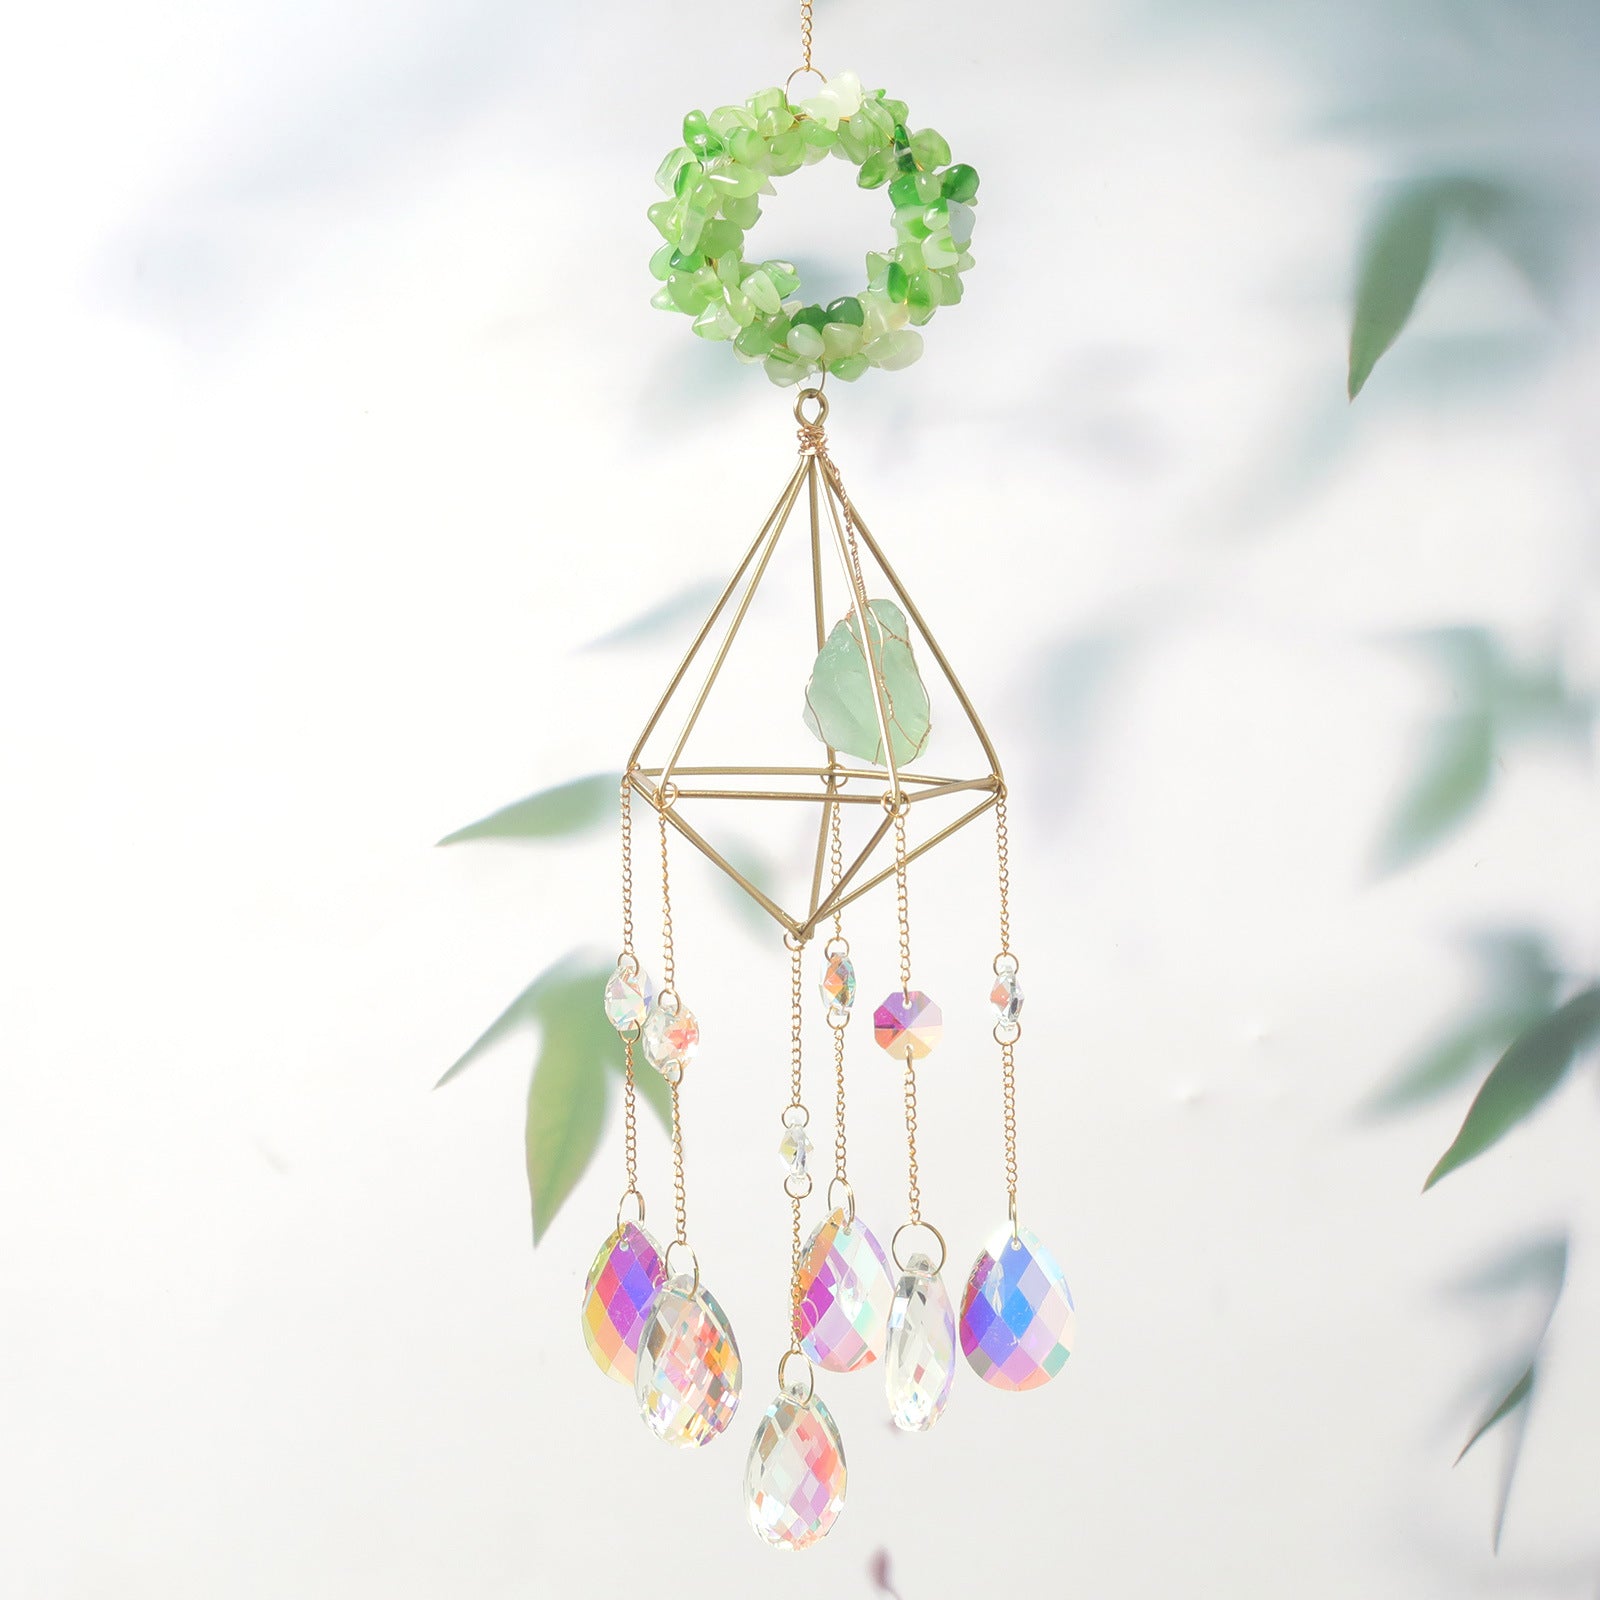 Colorful Crystal Suncatcher Hanging For Indoor Outdoor Decor